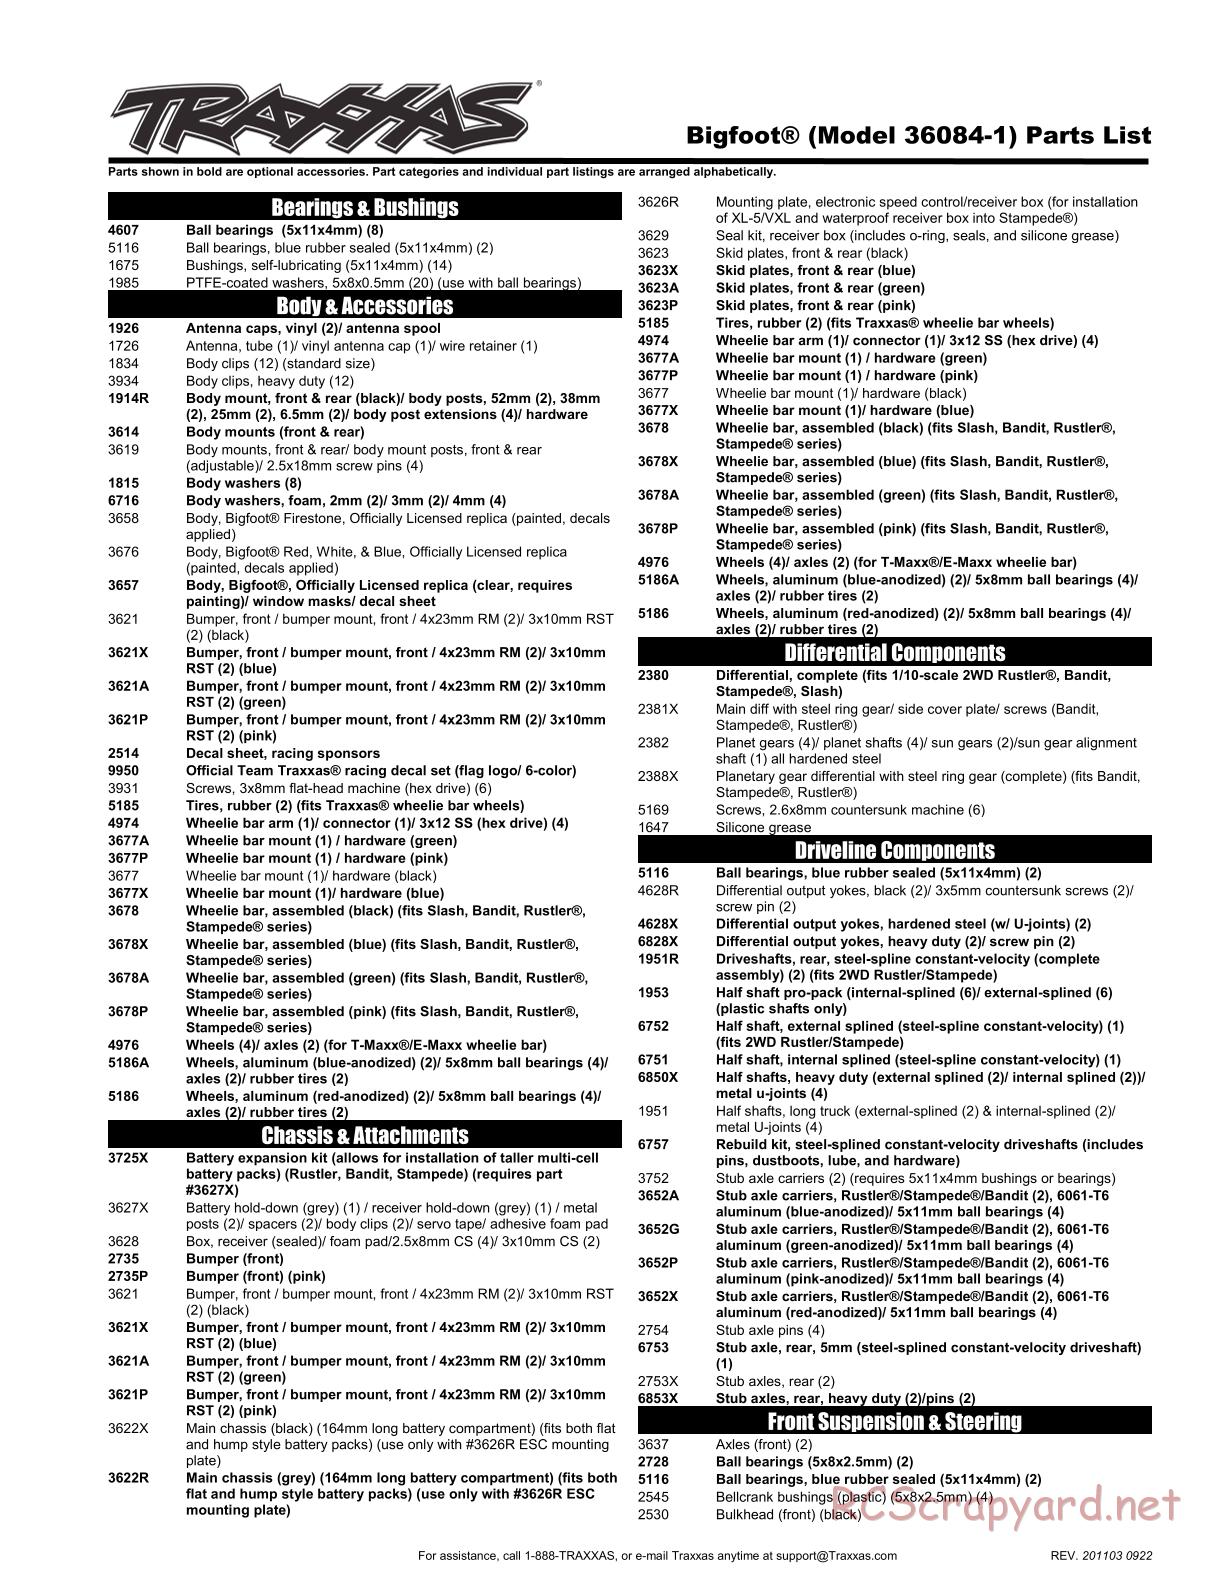 Traxxas - Bigfoot - Parts List - Page 1